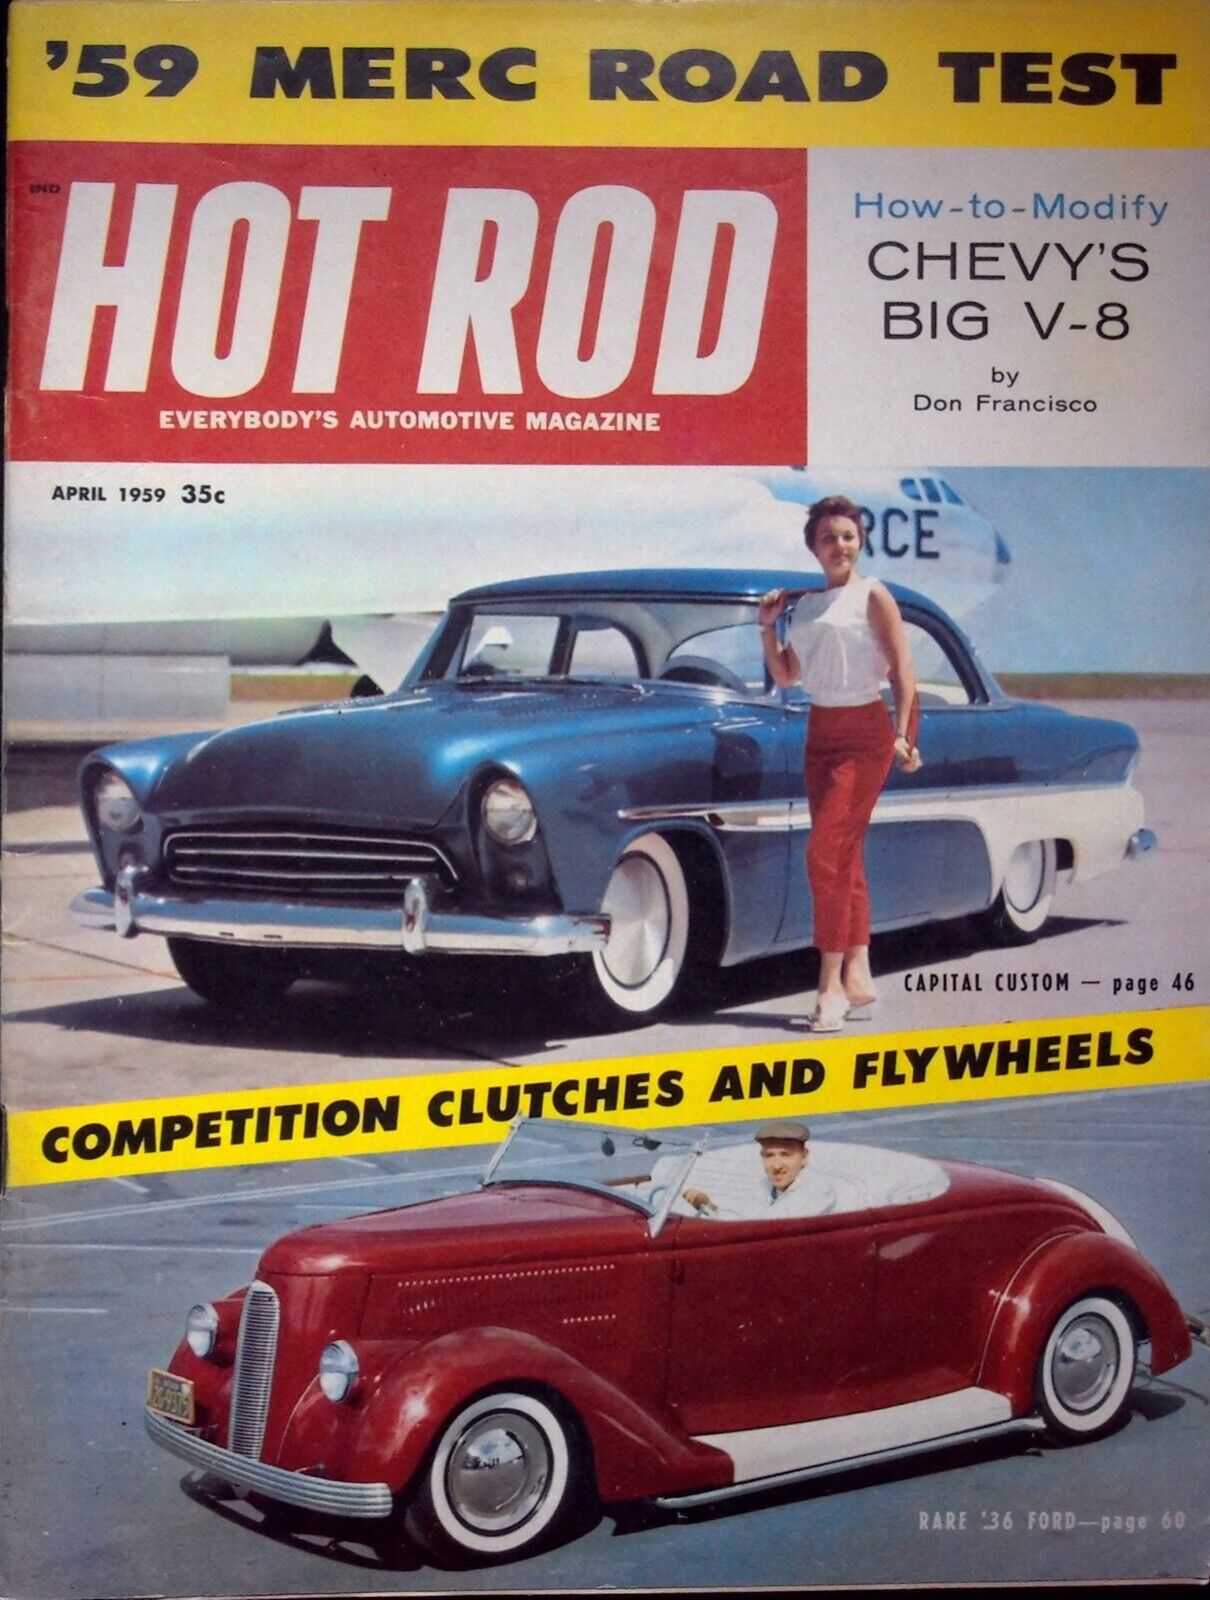 COMPETITION CLUTCHES AND FLYWHEELS - HOT ROD MAGAZINE, APRIL 1959 VOL. 12 NO.4